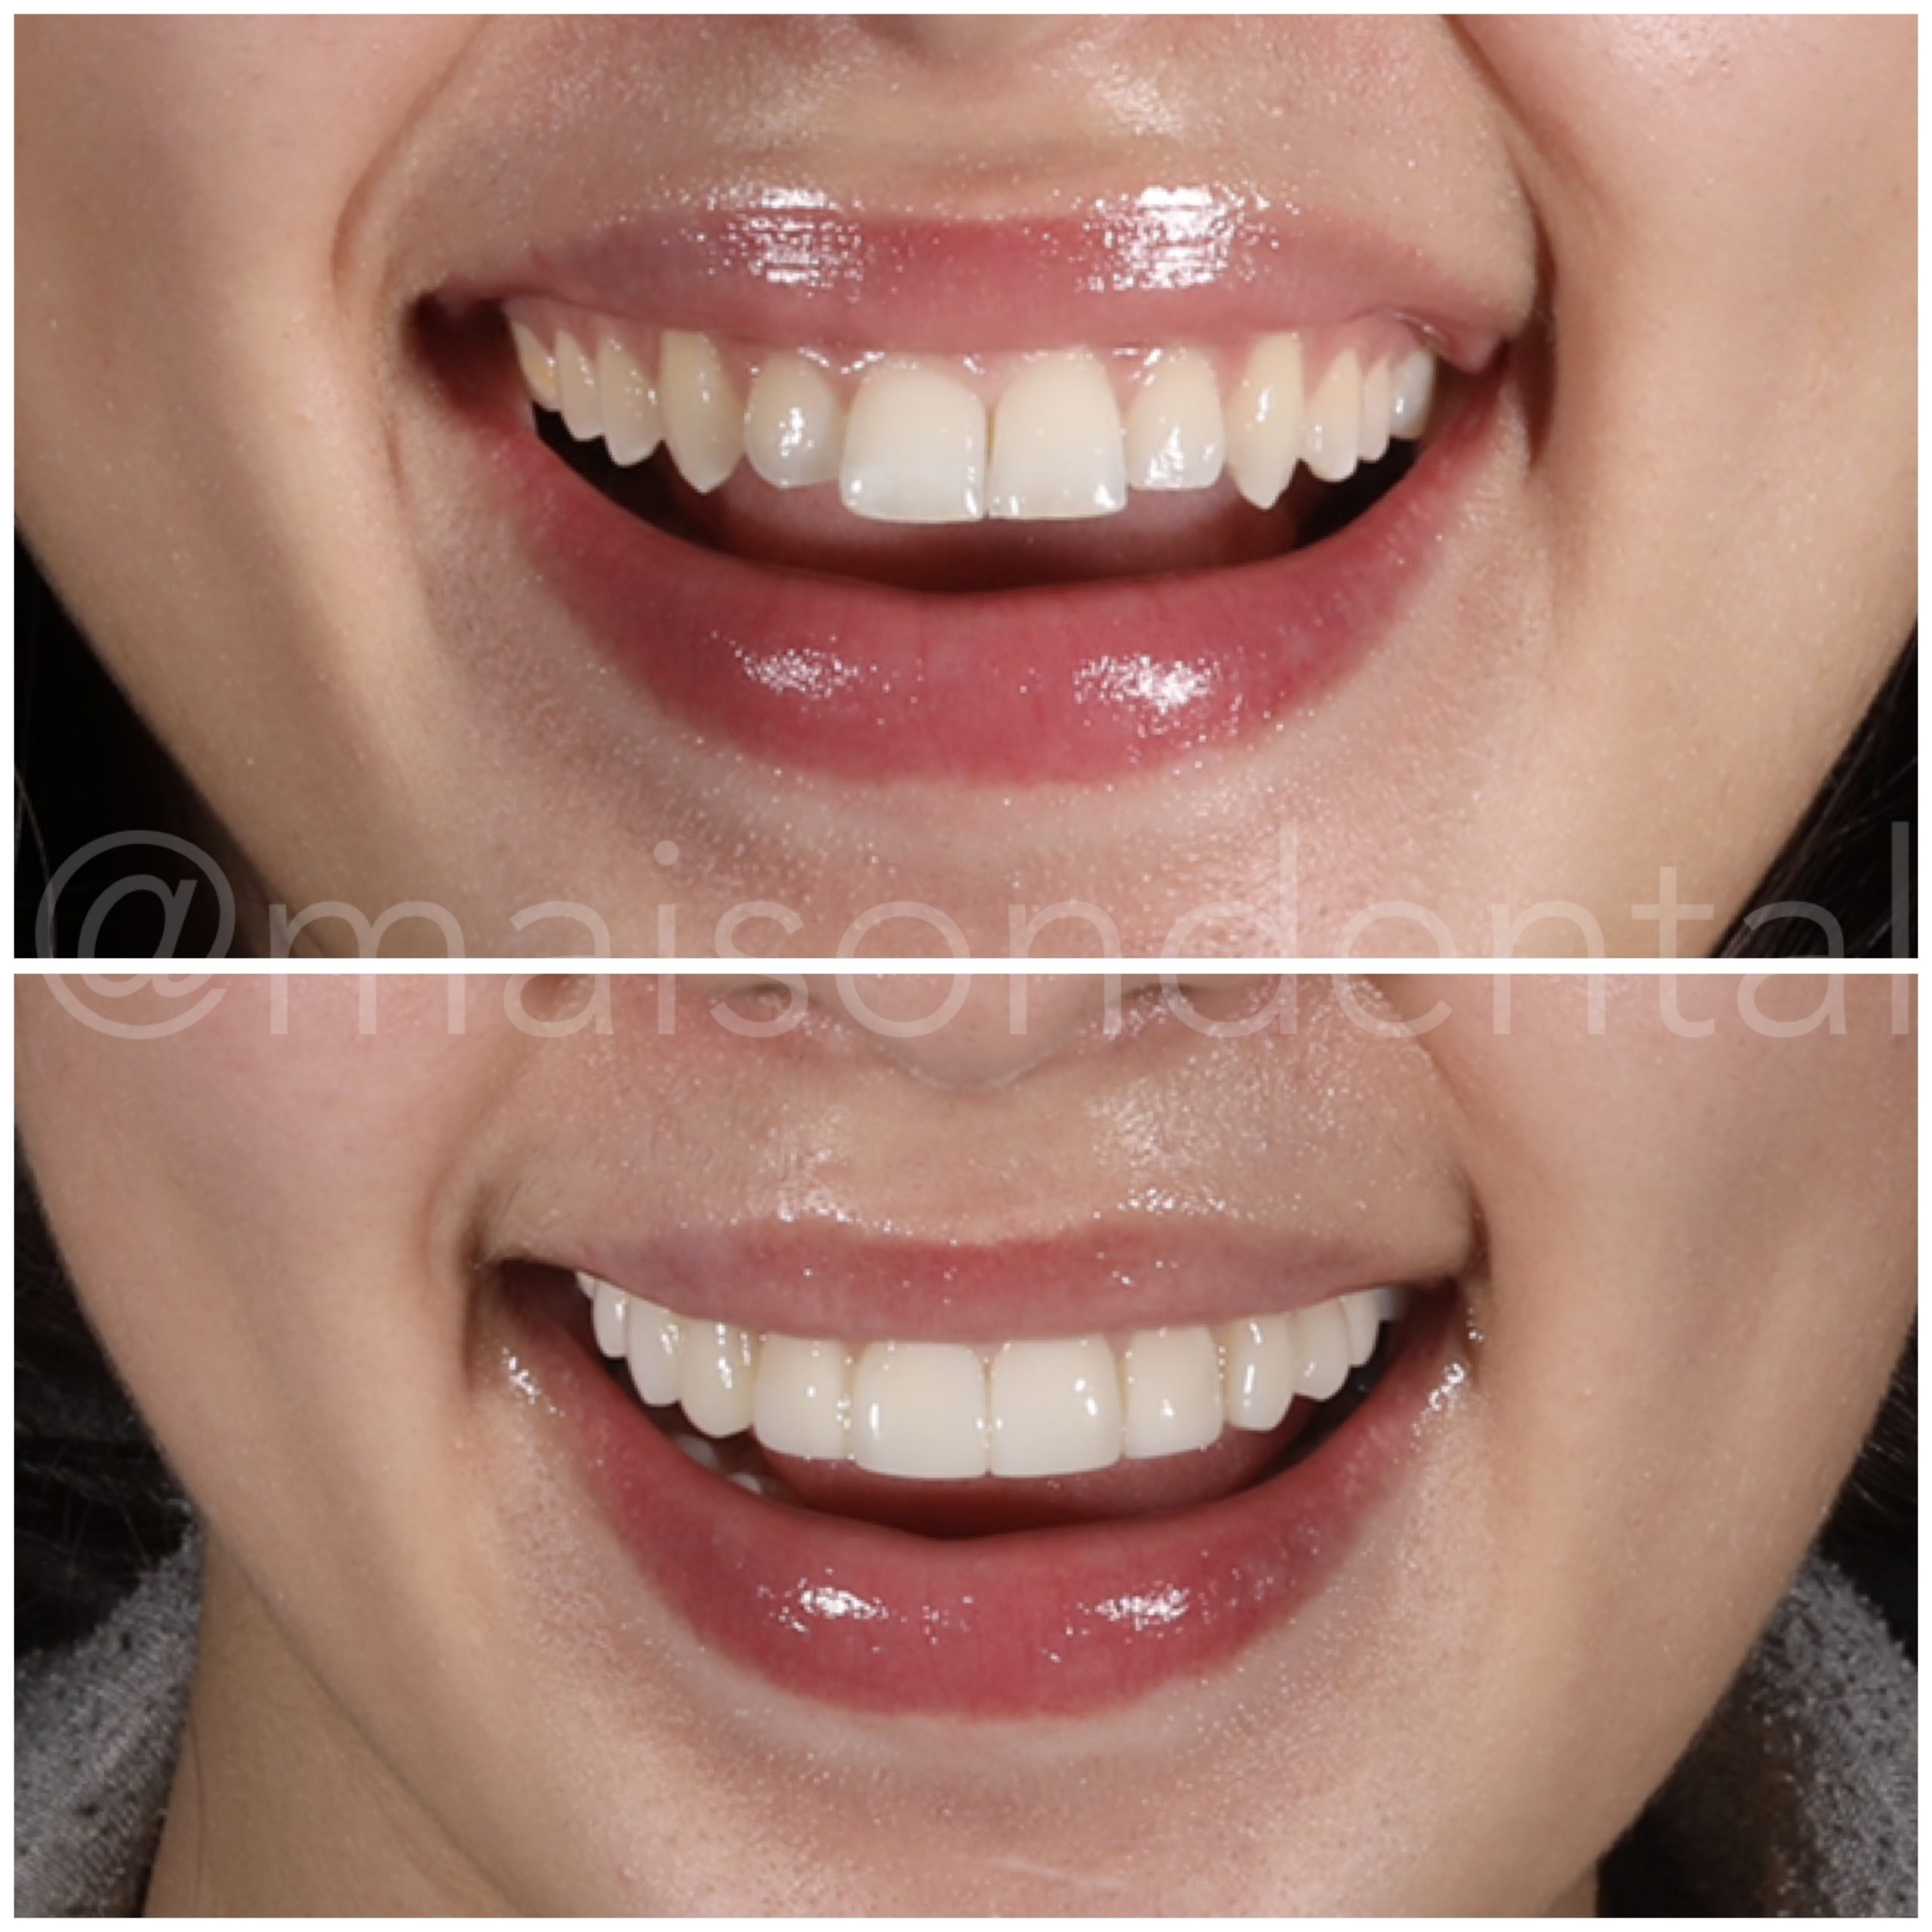 Creating a Brighter and Straighter Appearance of the Teeth with Composite Veneers